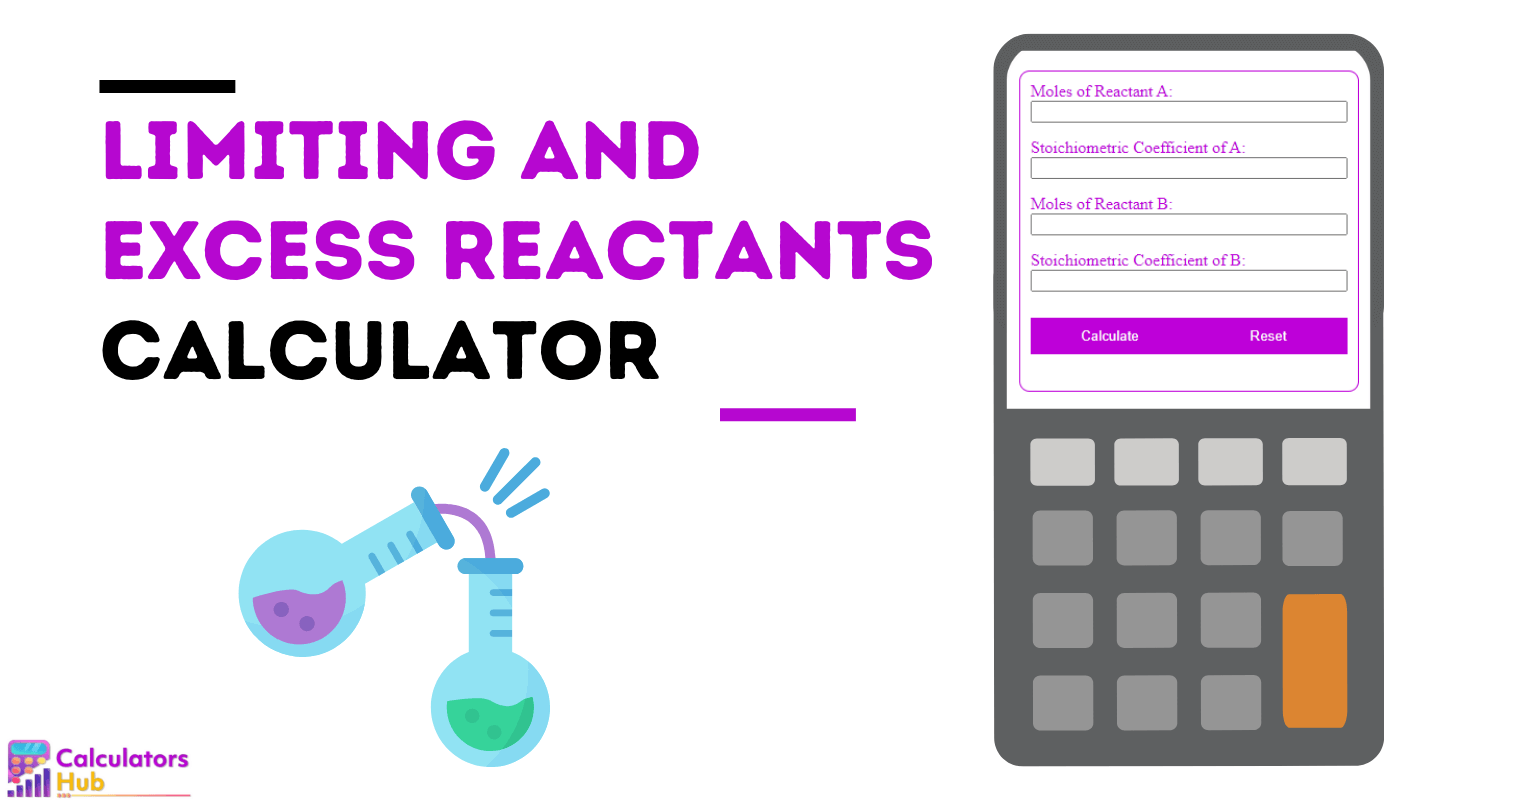 Limiting and Excess Reactants Calculator